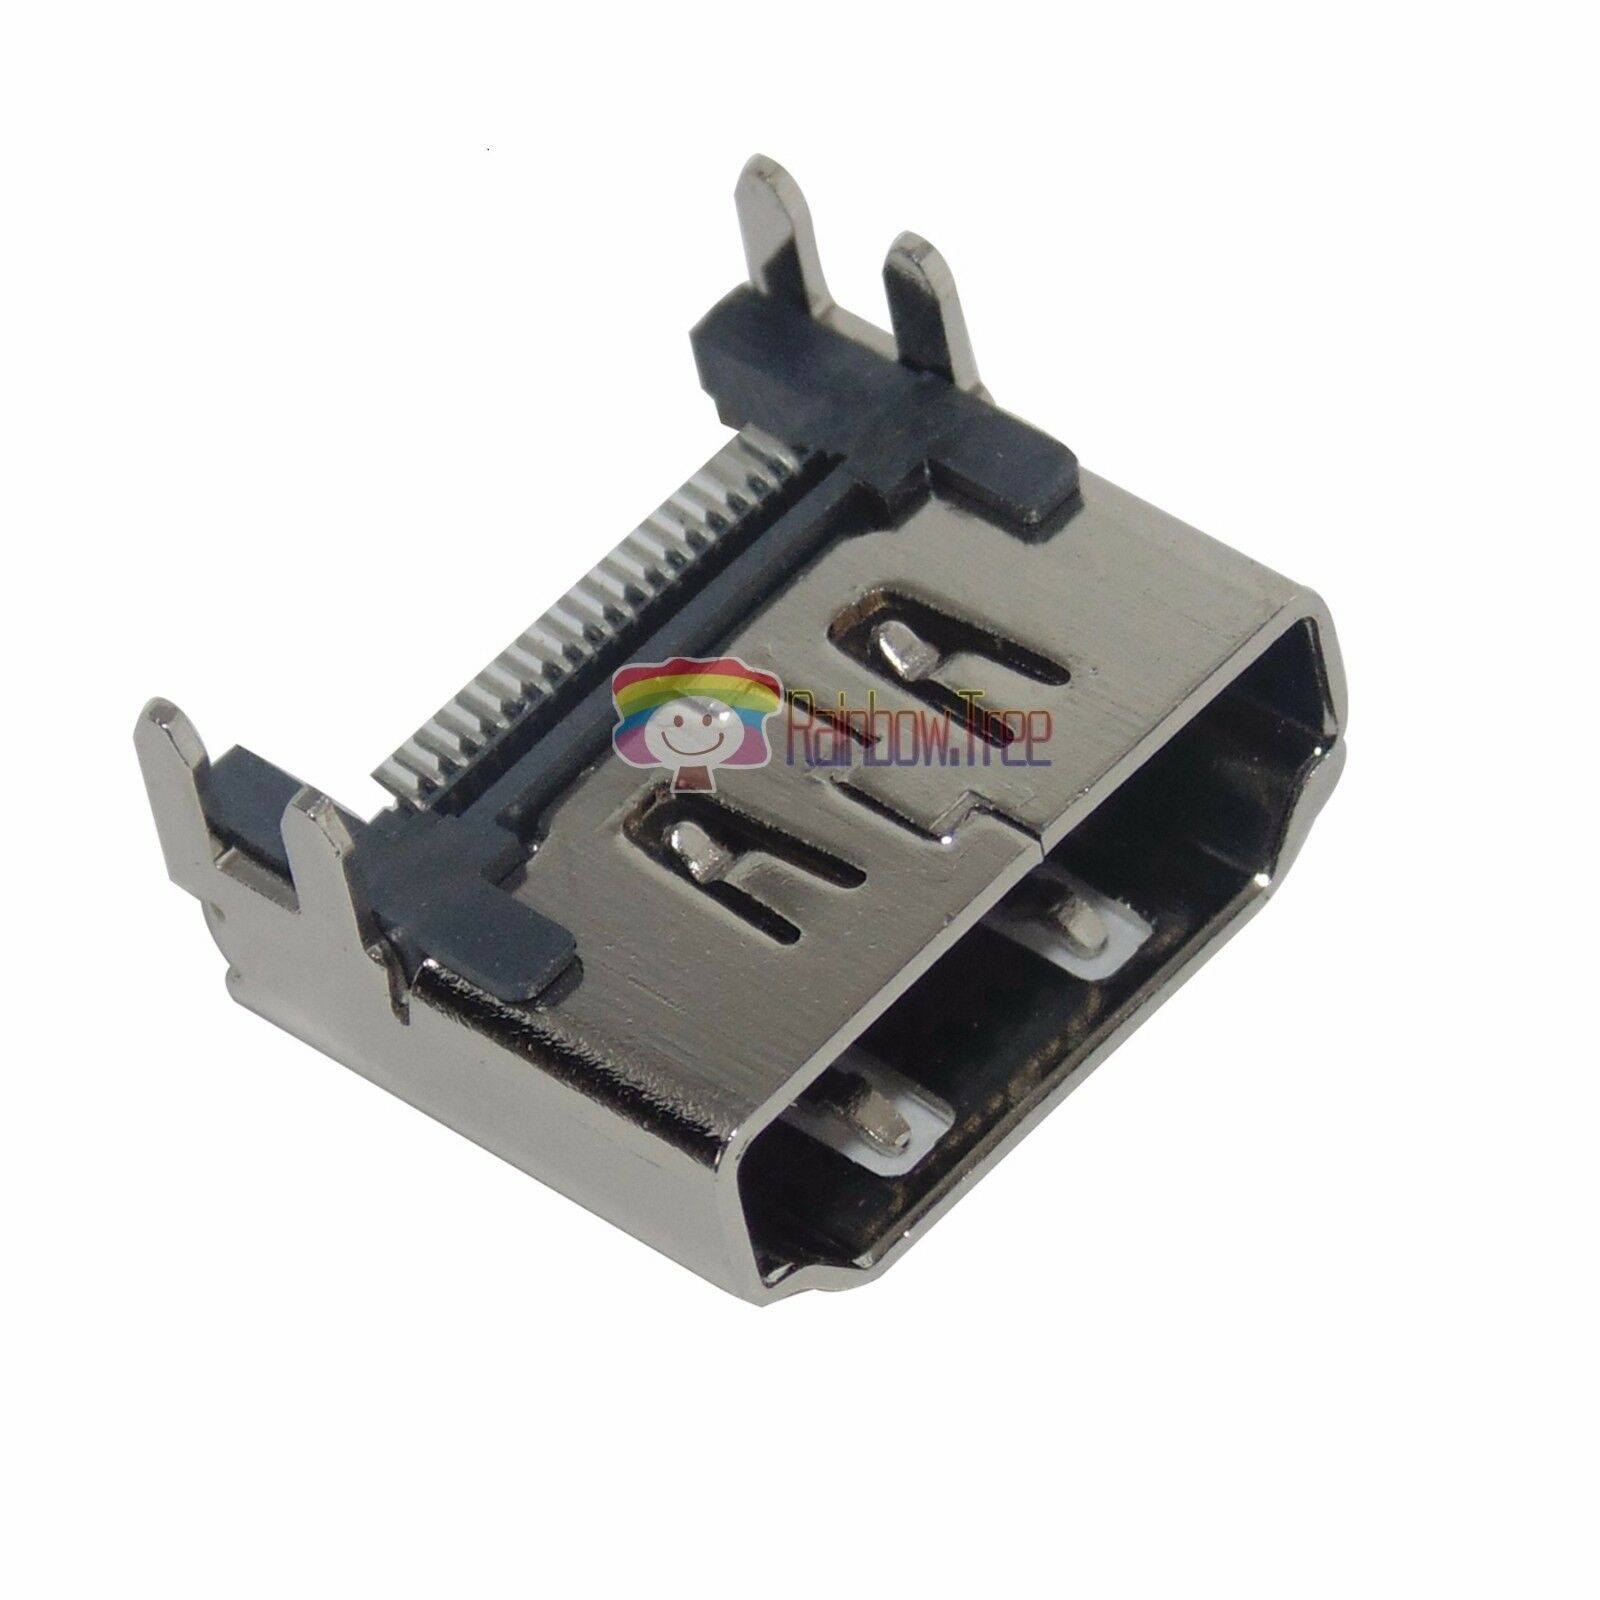 Ps4 Hdmi Port Socket Interface Connector Replacement For Sony Playstation 4 Us